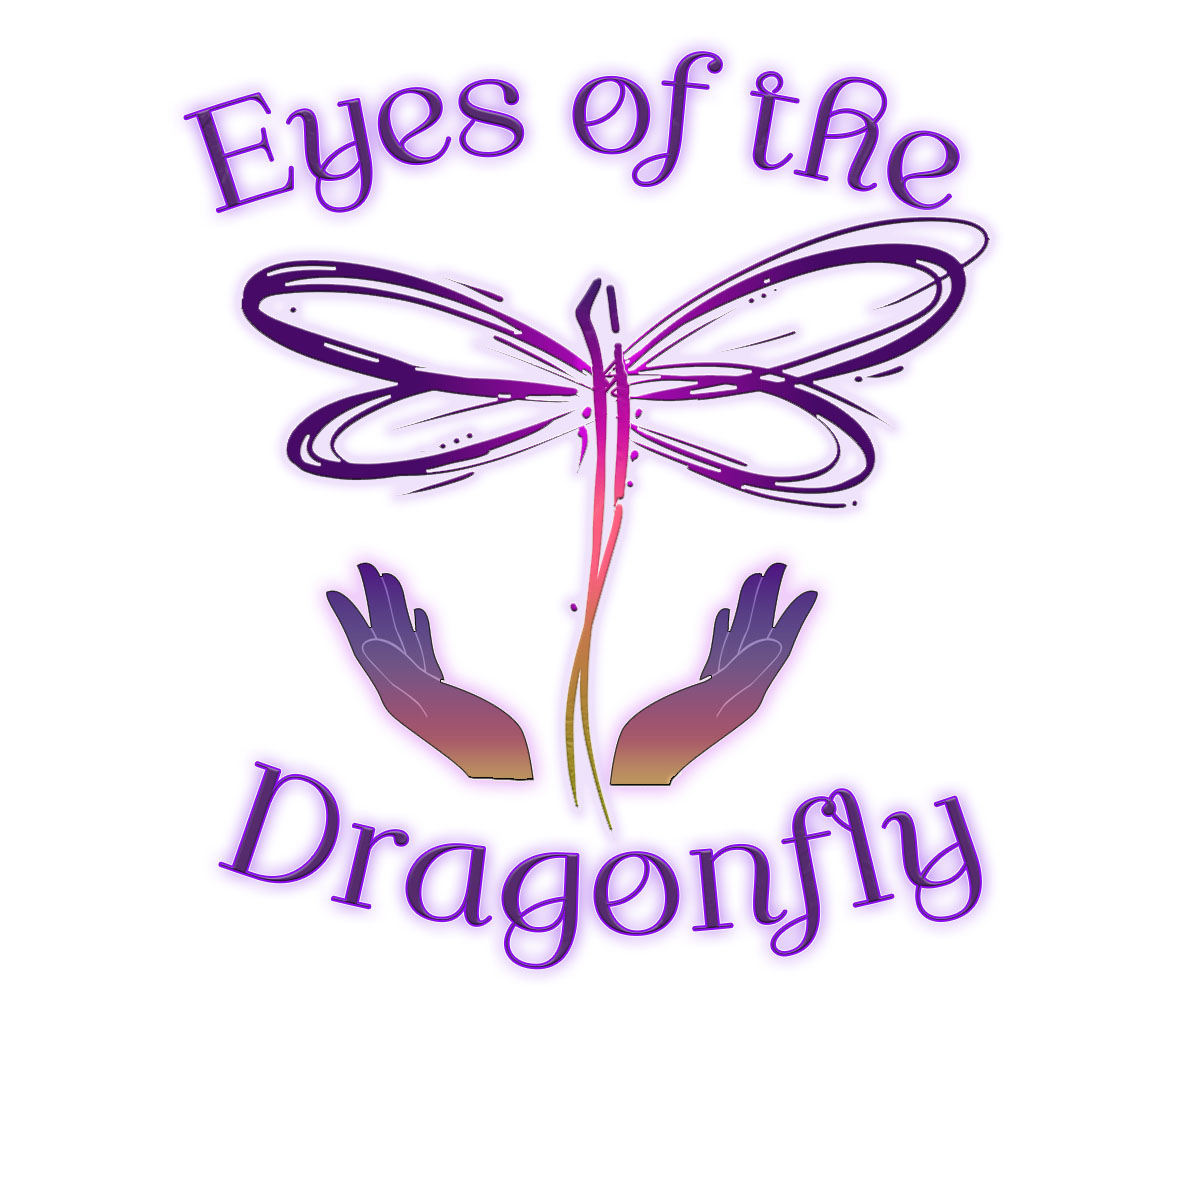 Eyes of the Dragonfly